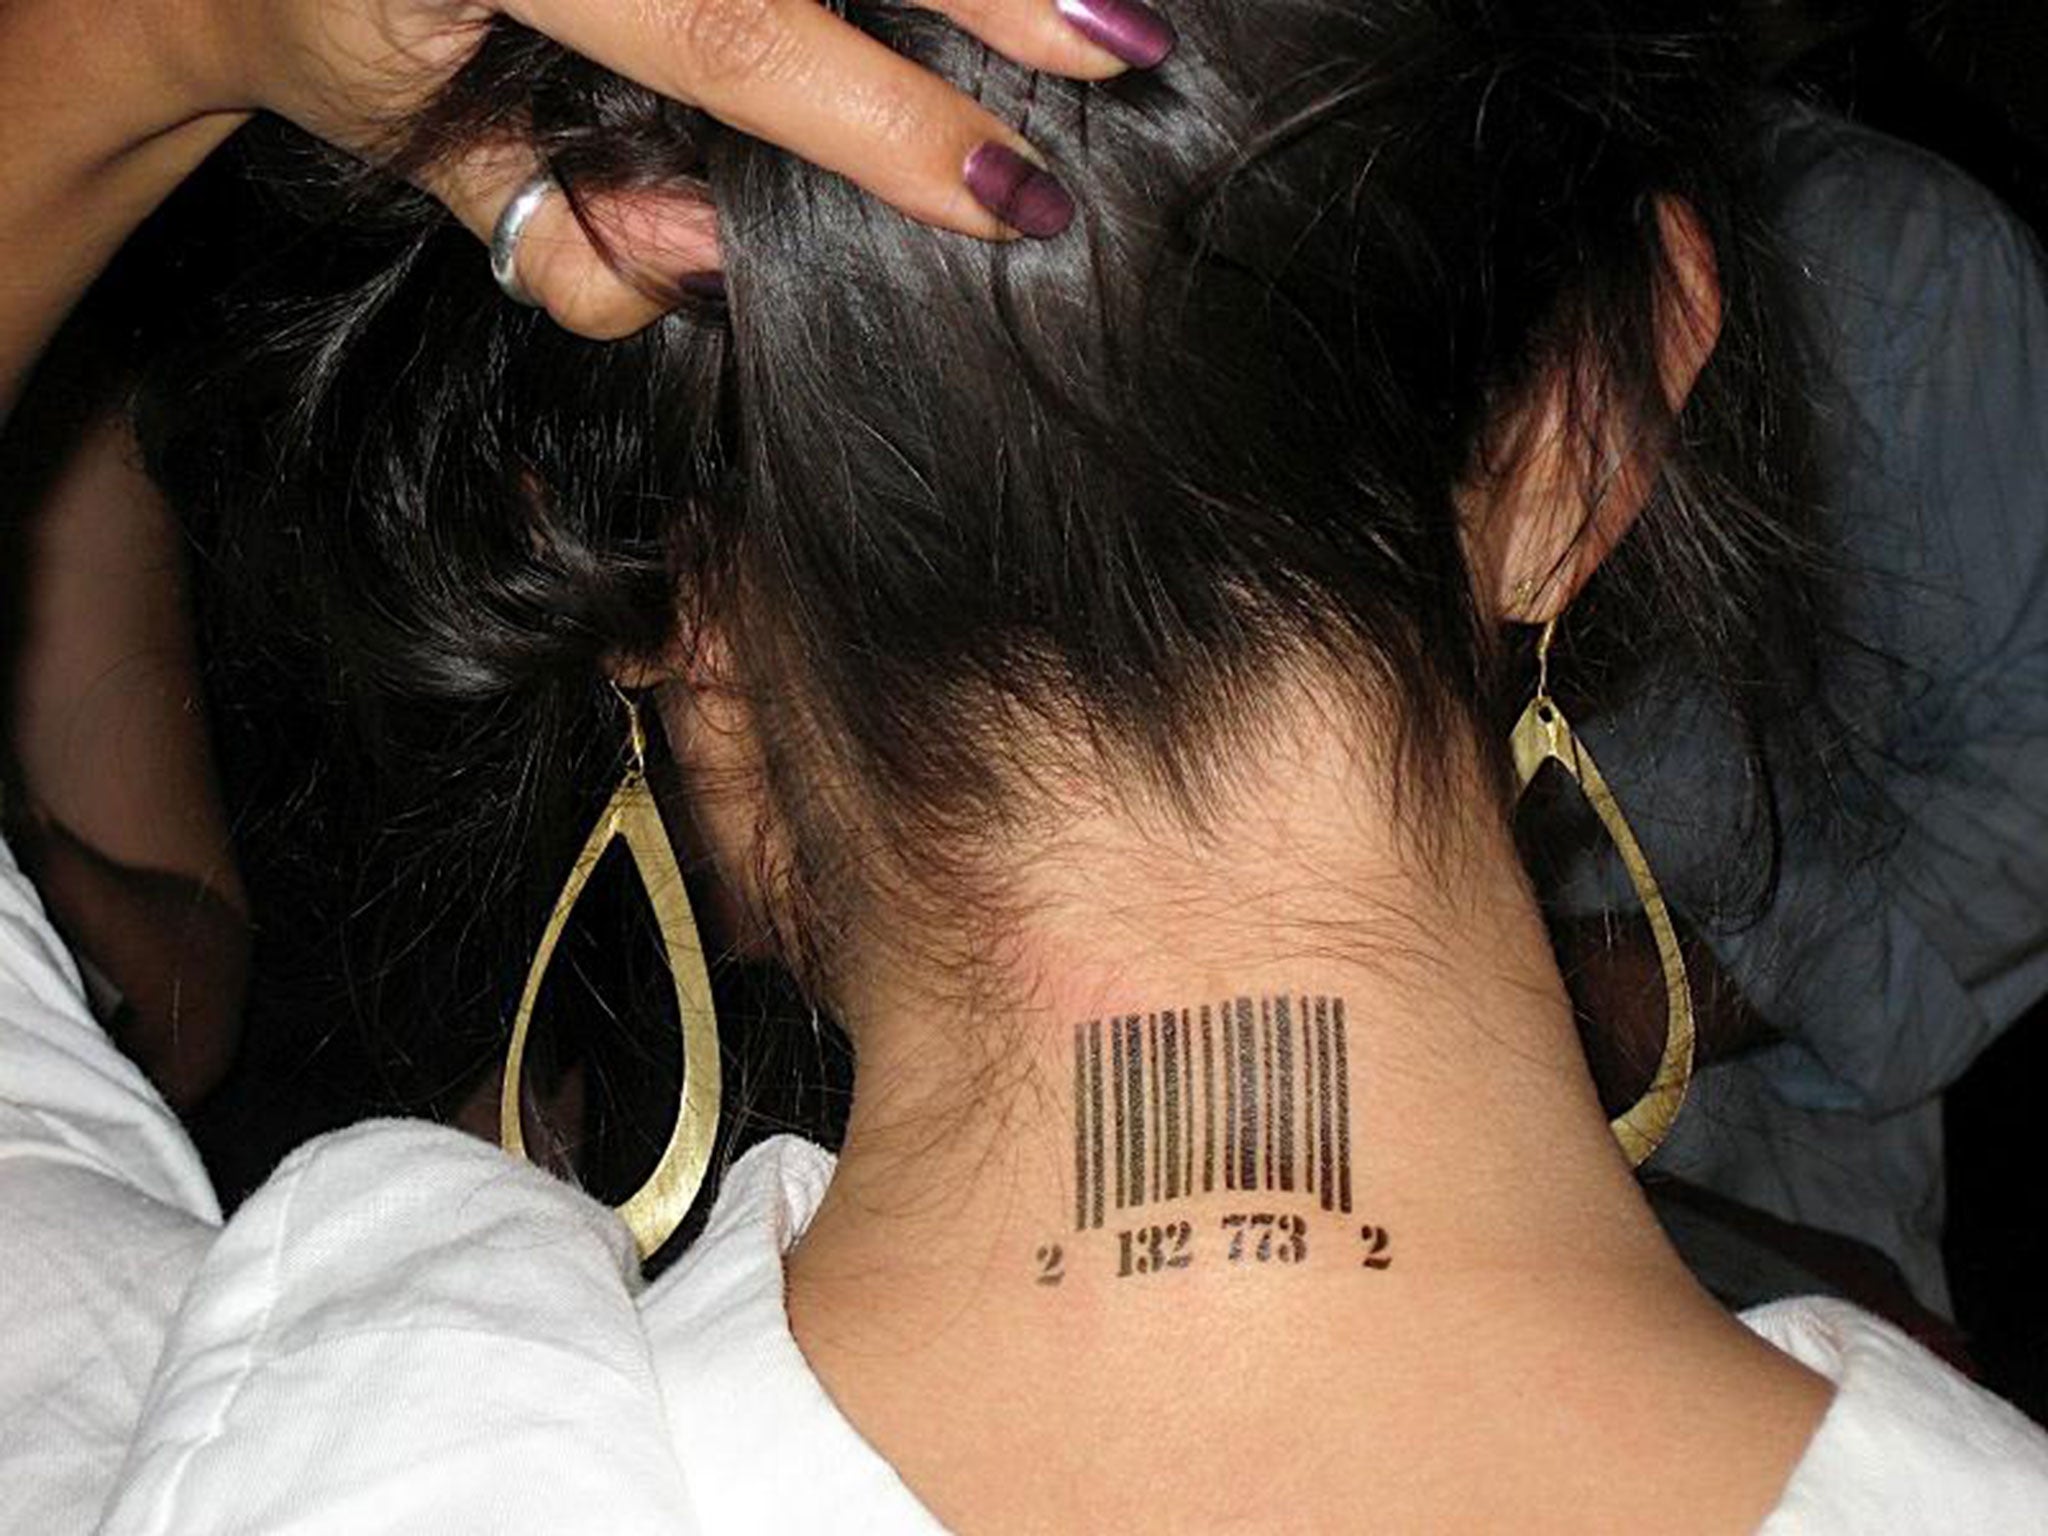 Human Traffickers Victims ‘branded Like Cattle Crime News The